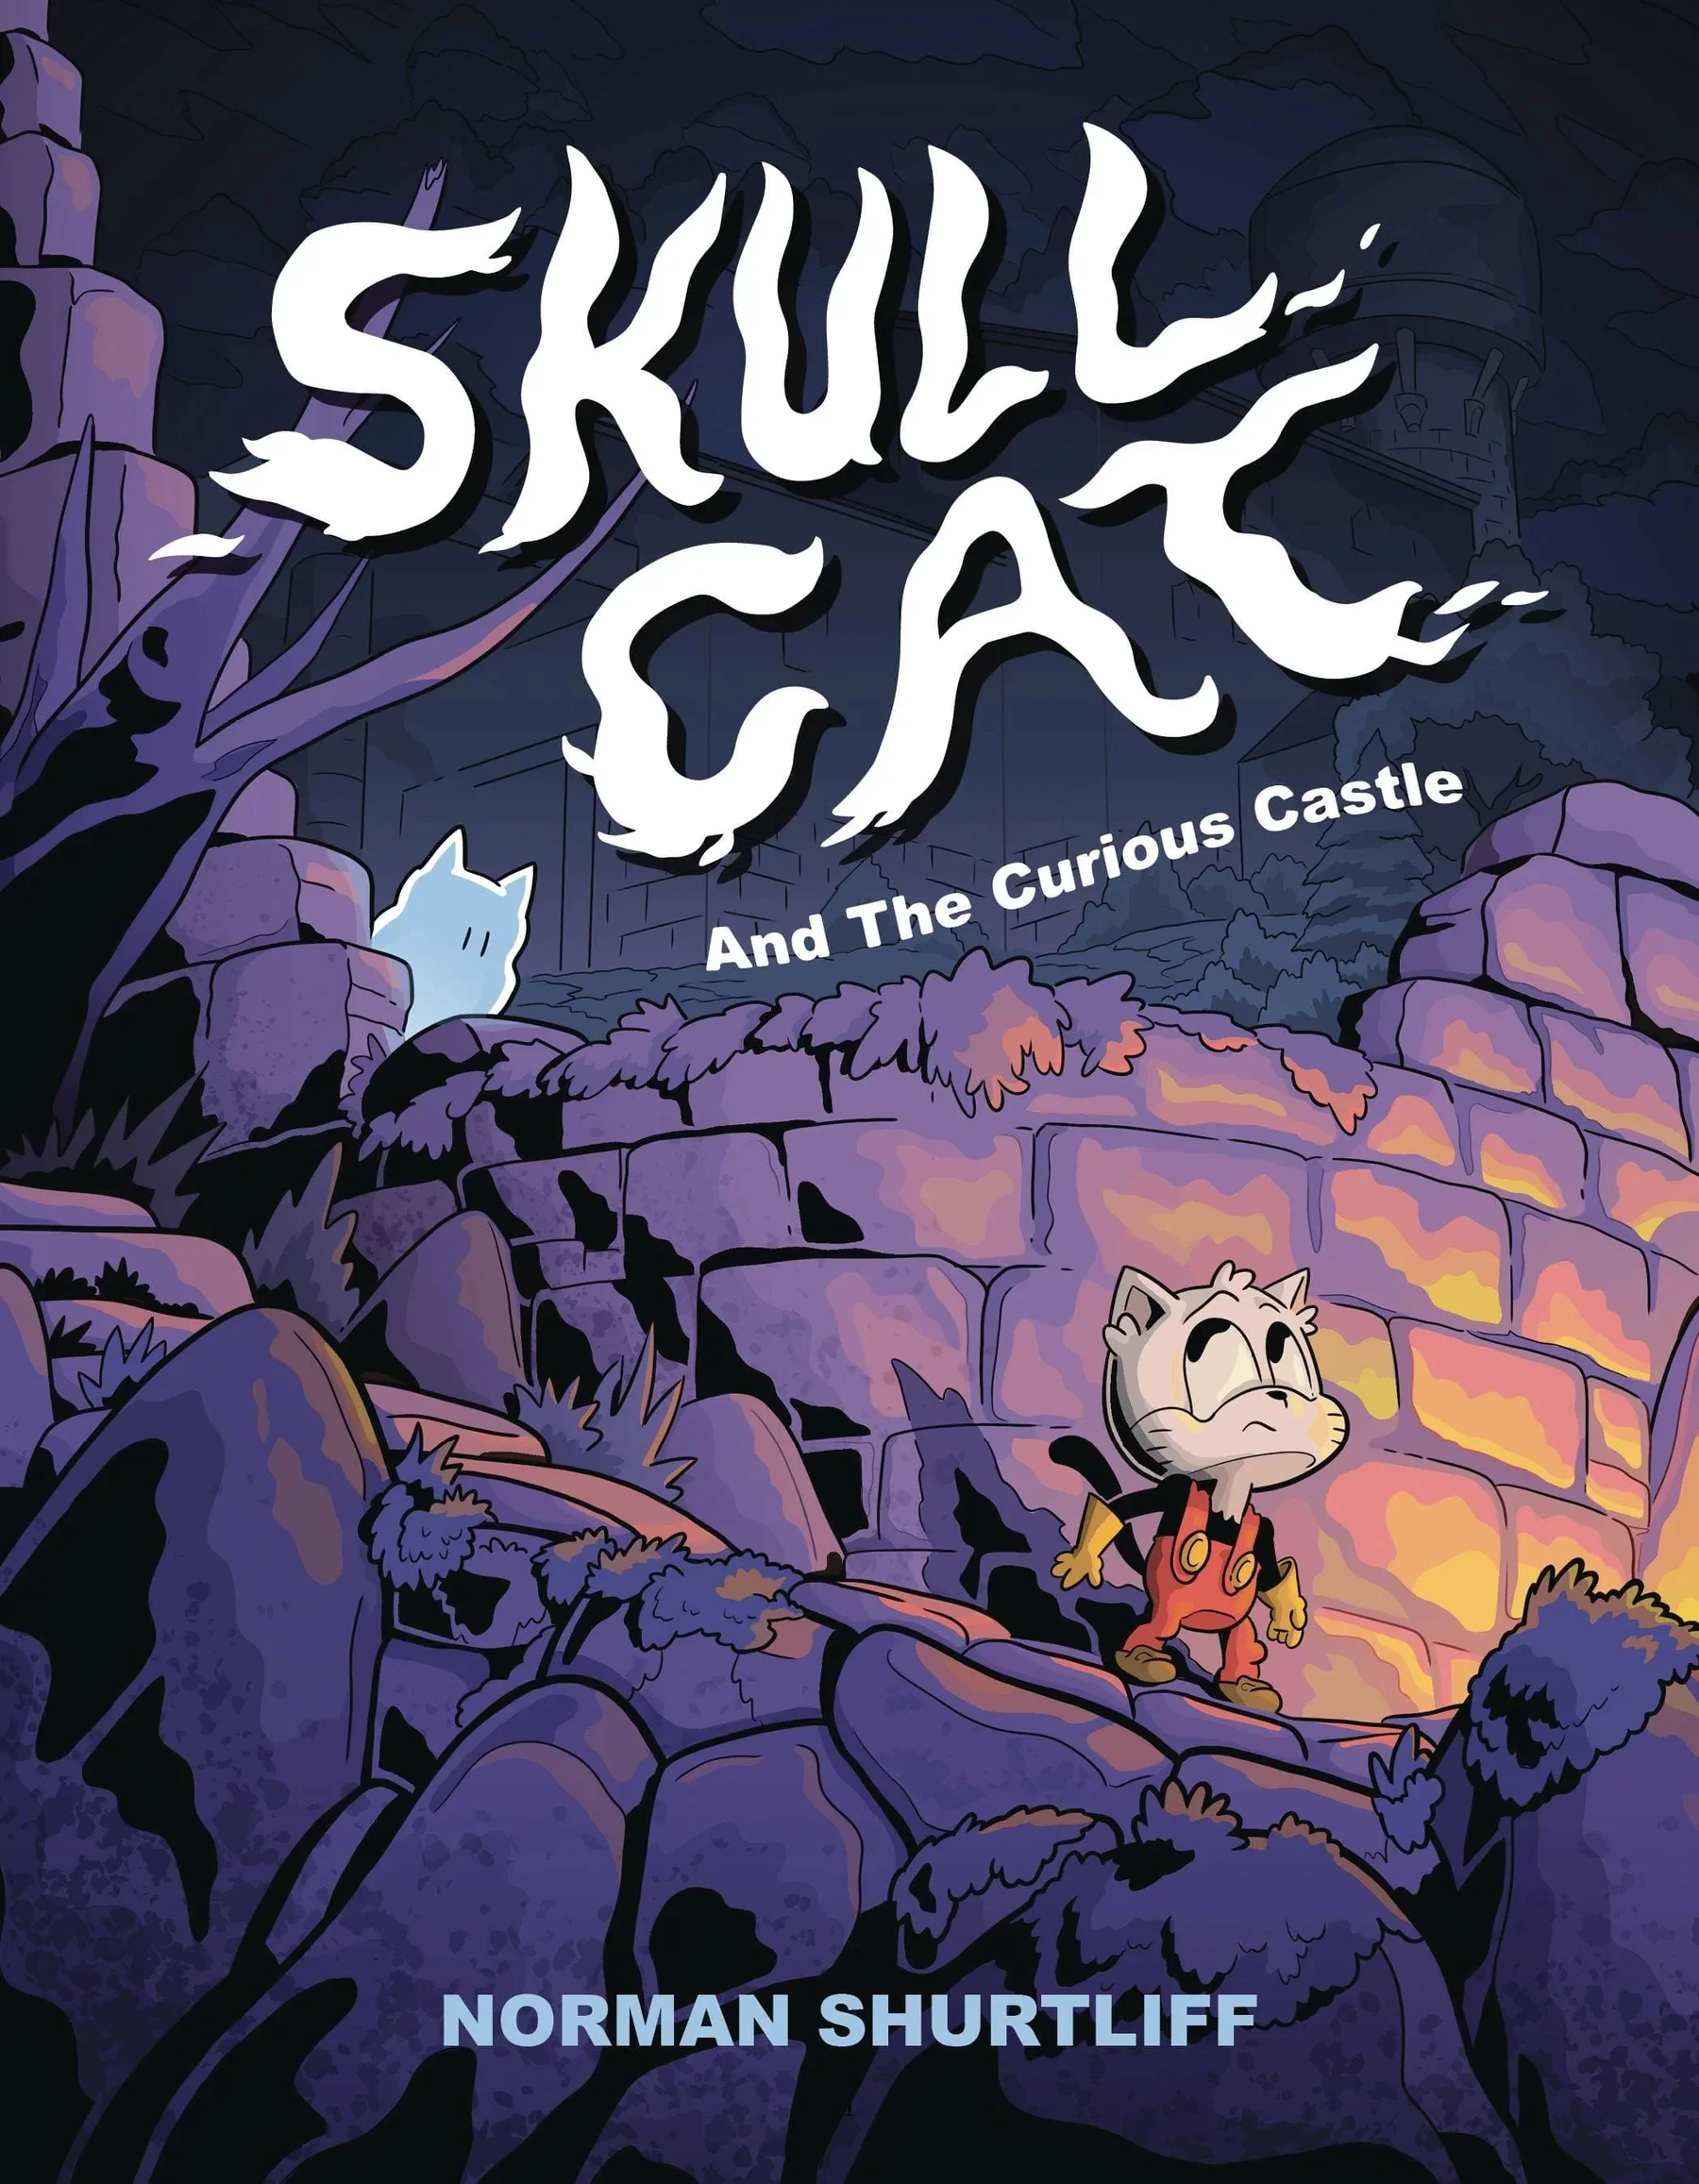 Cover of Skull Cat, featuring cat wearing overalls looking up at a castle